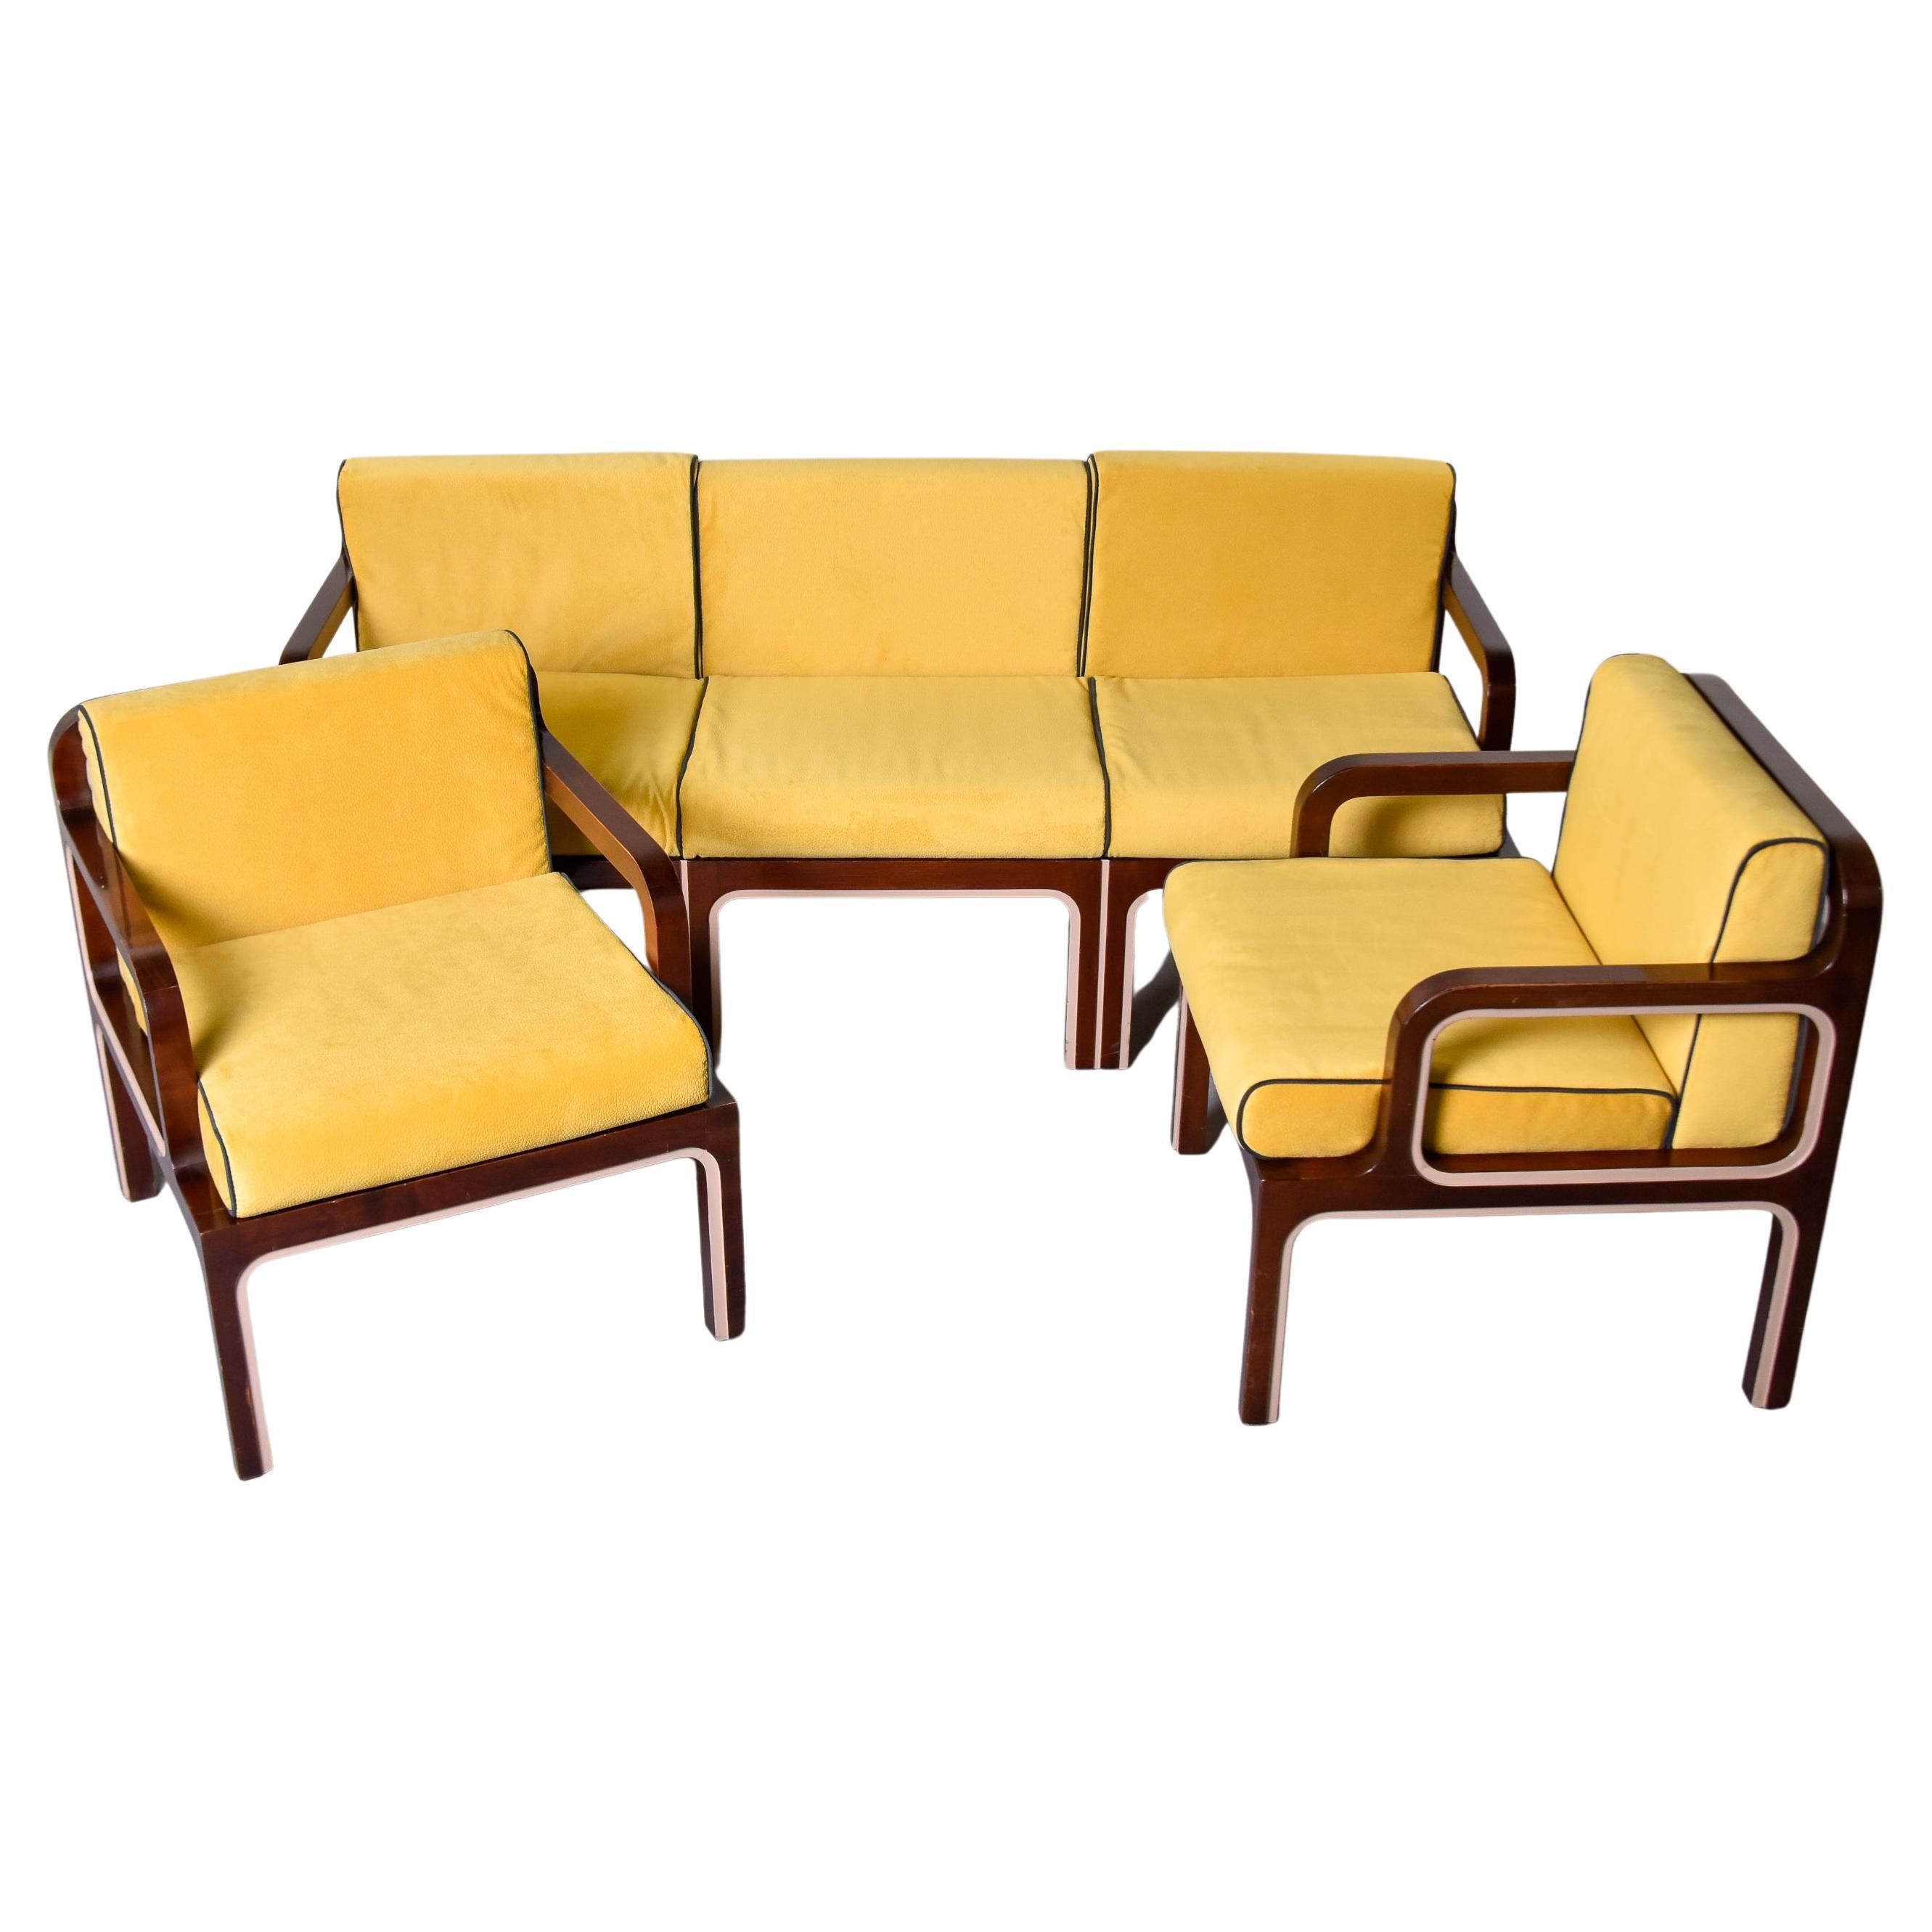 Midcentury English Mod Three Piece Set with Wood Framed Sofa and Pair Armchairs